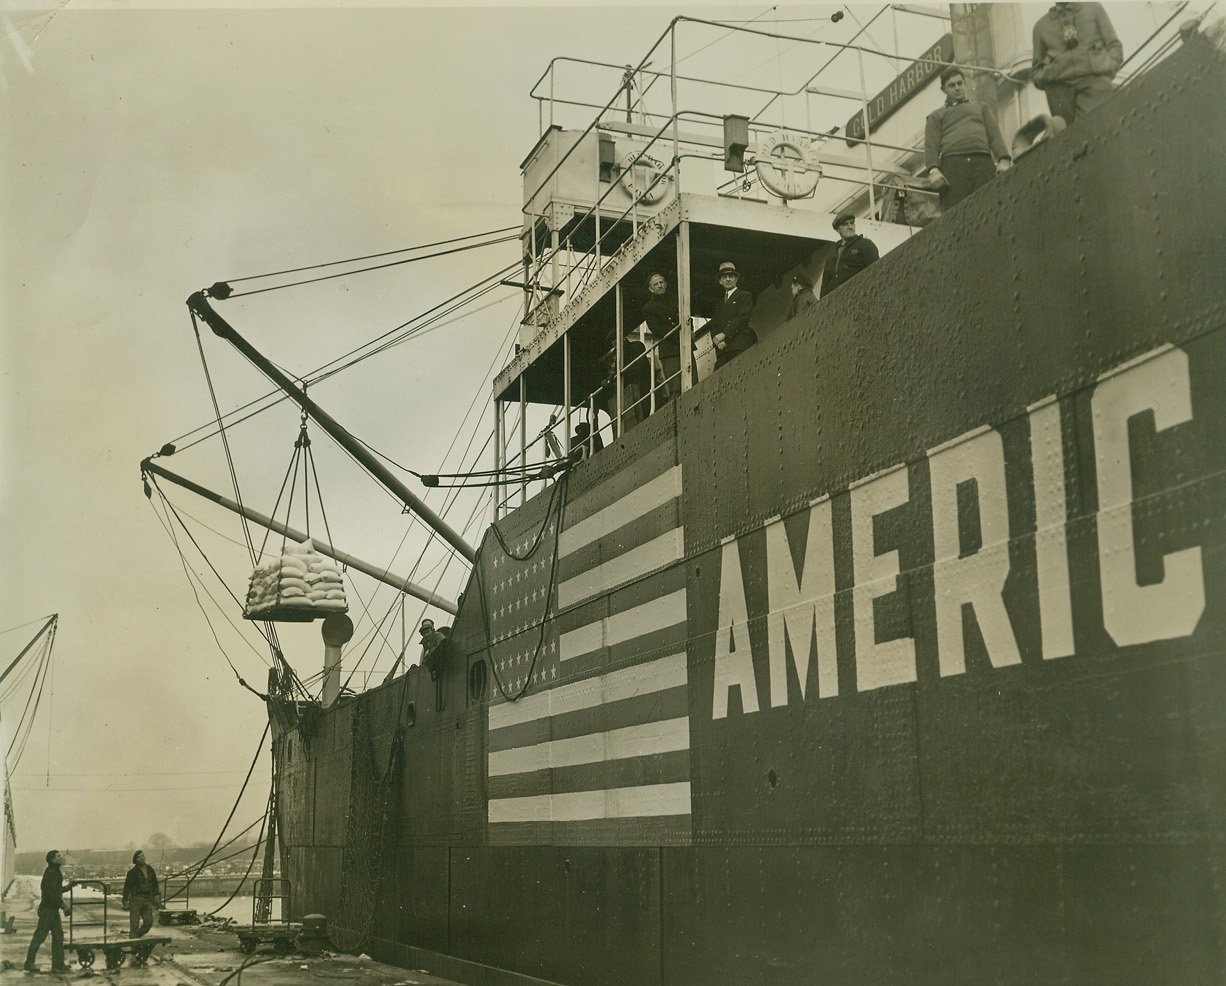 RED CROSS SHIP LOADS SUPPLIES FOR FRANCE, SPAIN, 1/28/41  BALTIMORE, MD—Sack of flour are loaded from a barge to the S.S. Cold Harbor, Red Cross “Mercy Ship” chartered from the United States lines to carry a cargo of relief supplies to Cardiz, Spain, for use in Spain and unoccupied France. The ship, which will pass through the British blockade under special permission of the British Government, will sail from Baltimore on Feb. 1st. Credit: OWI Radiophoto from ACME;